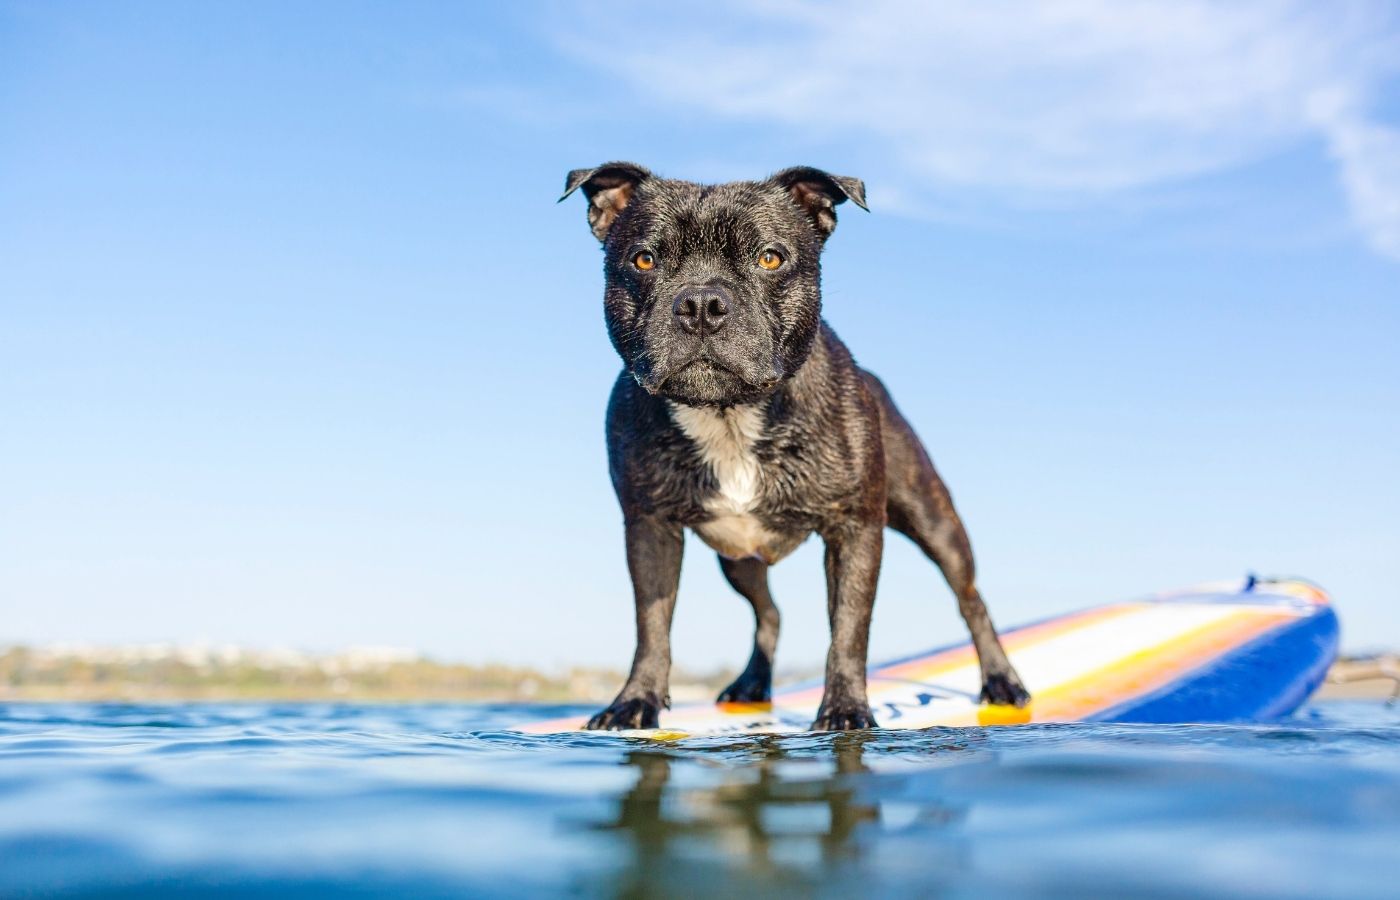 dog-friendly activities in county cork. Where can I take my dog? Dog friendly stand up paddle board Ireland .jpg